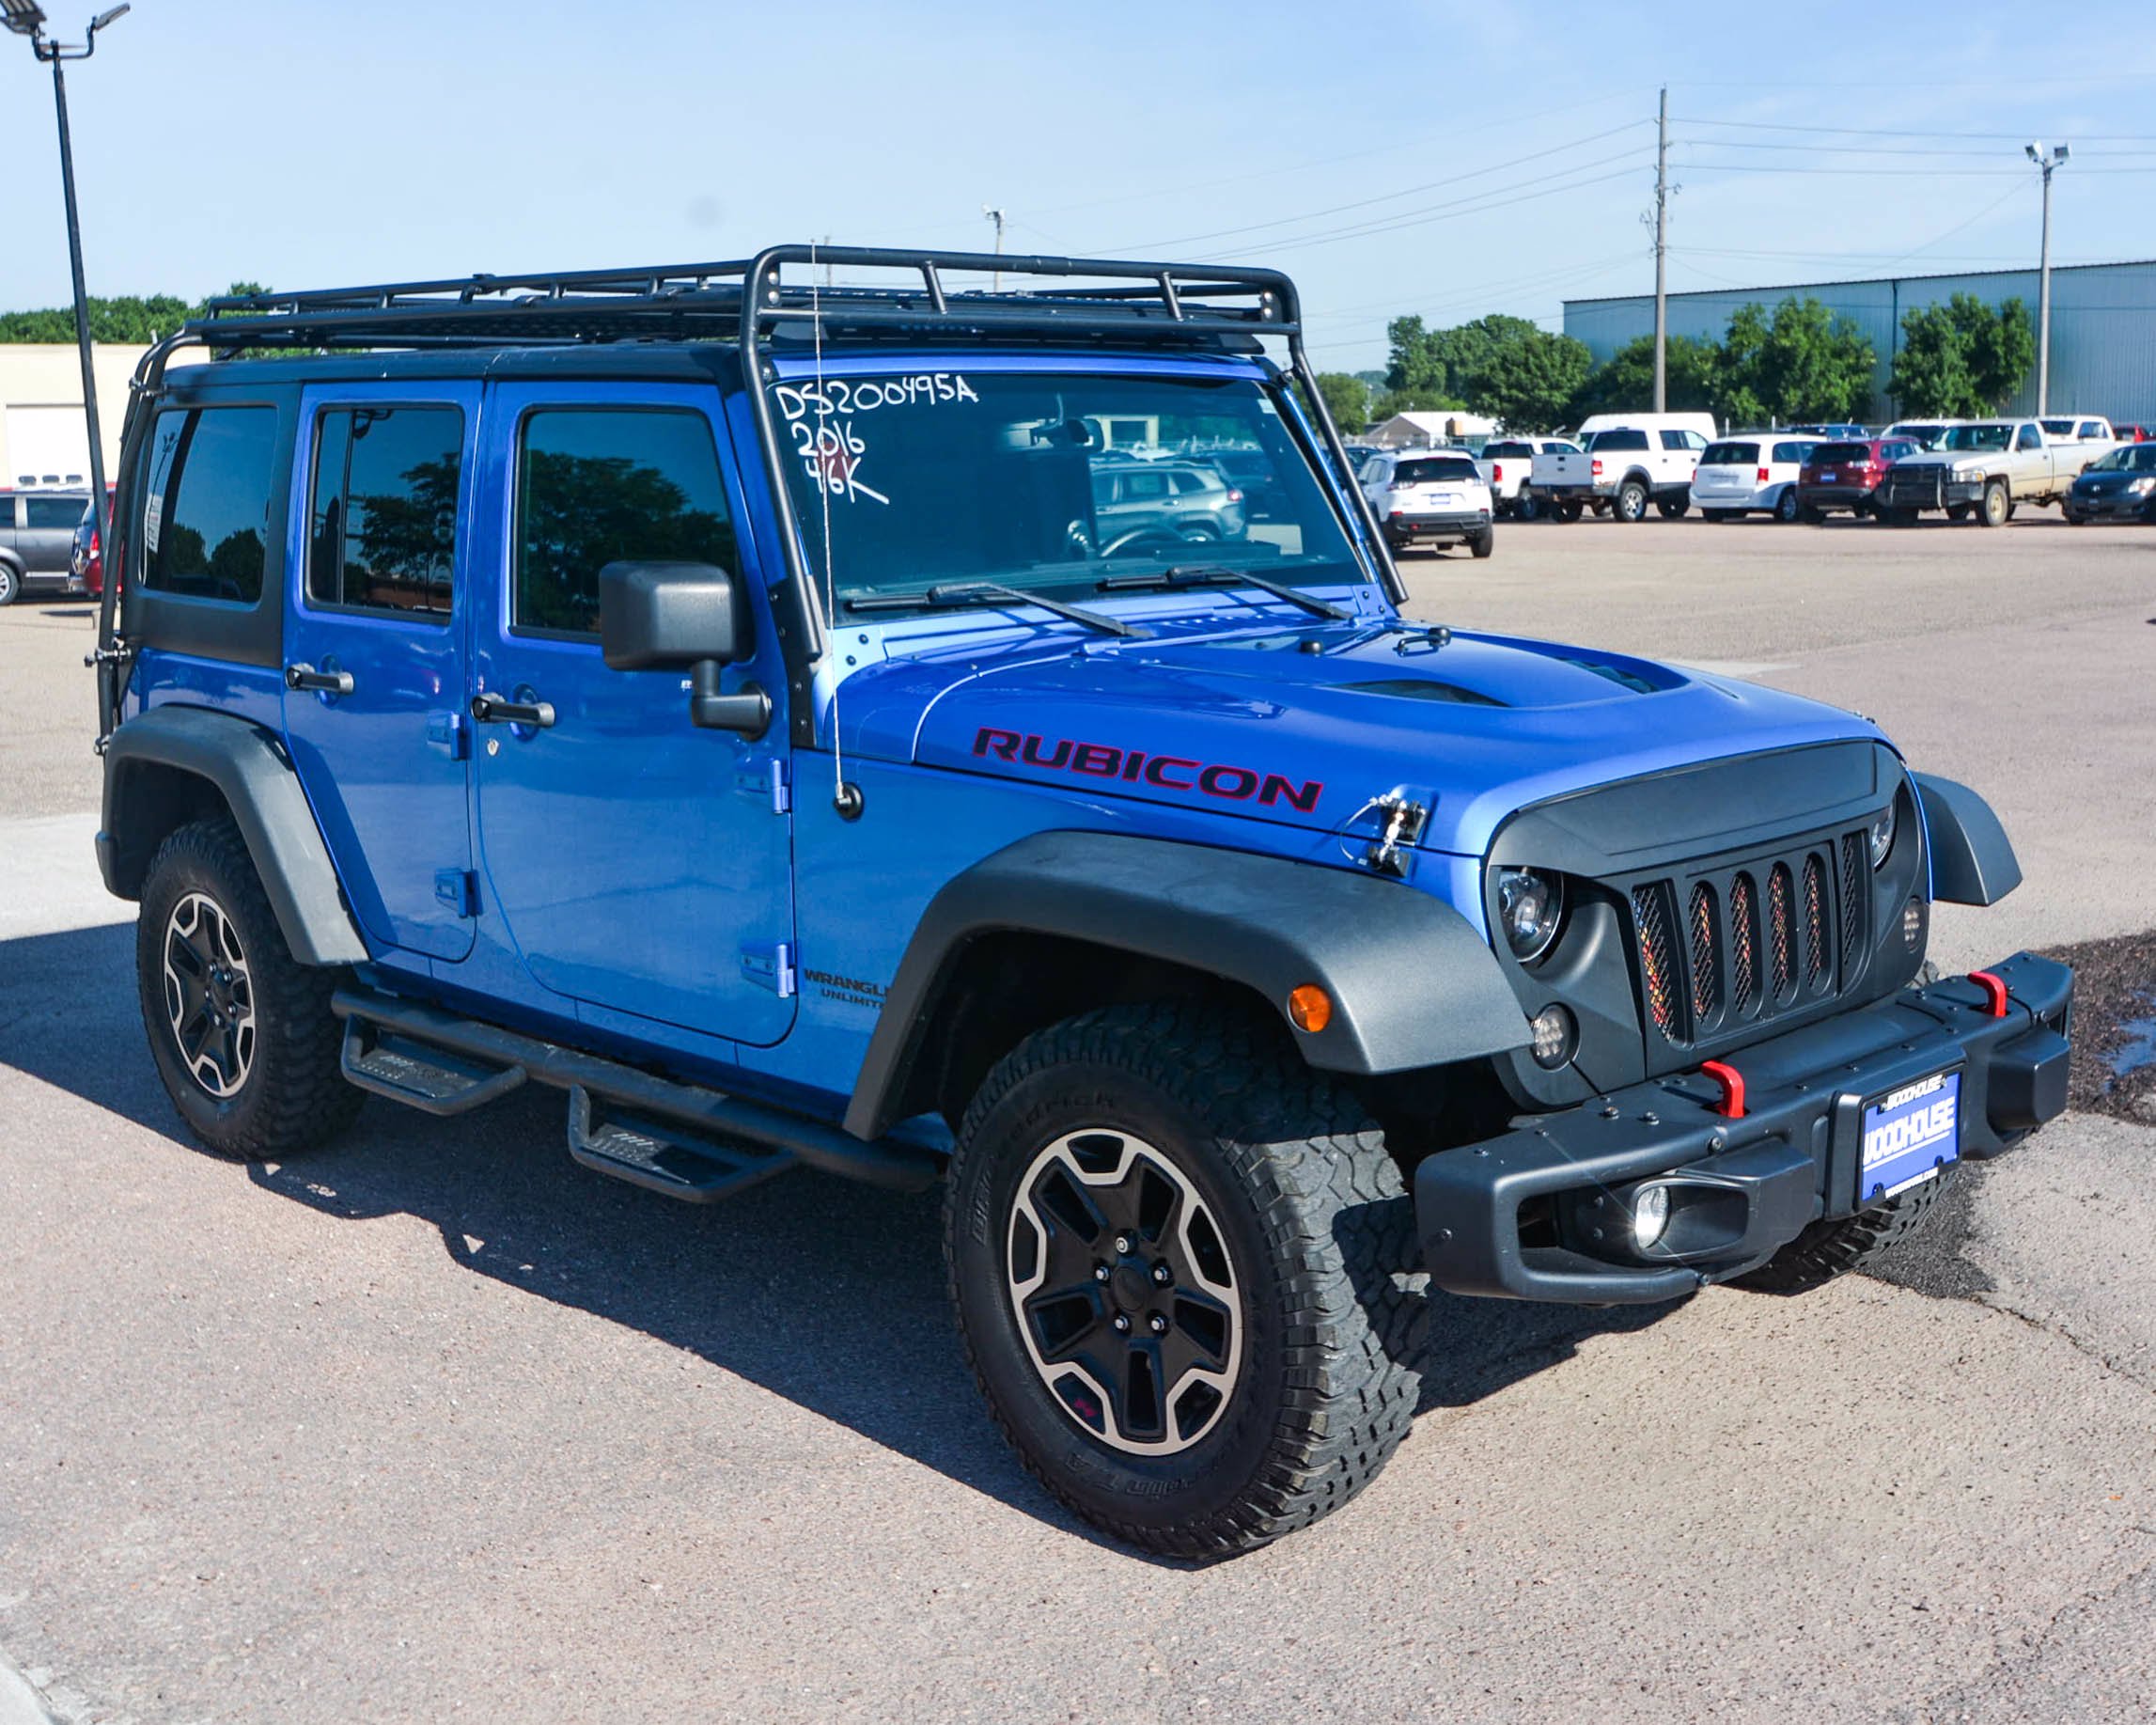 PreOwned 2016 Jeep Wrangler Unlimited Rubicon Hard Rock 4WD